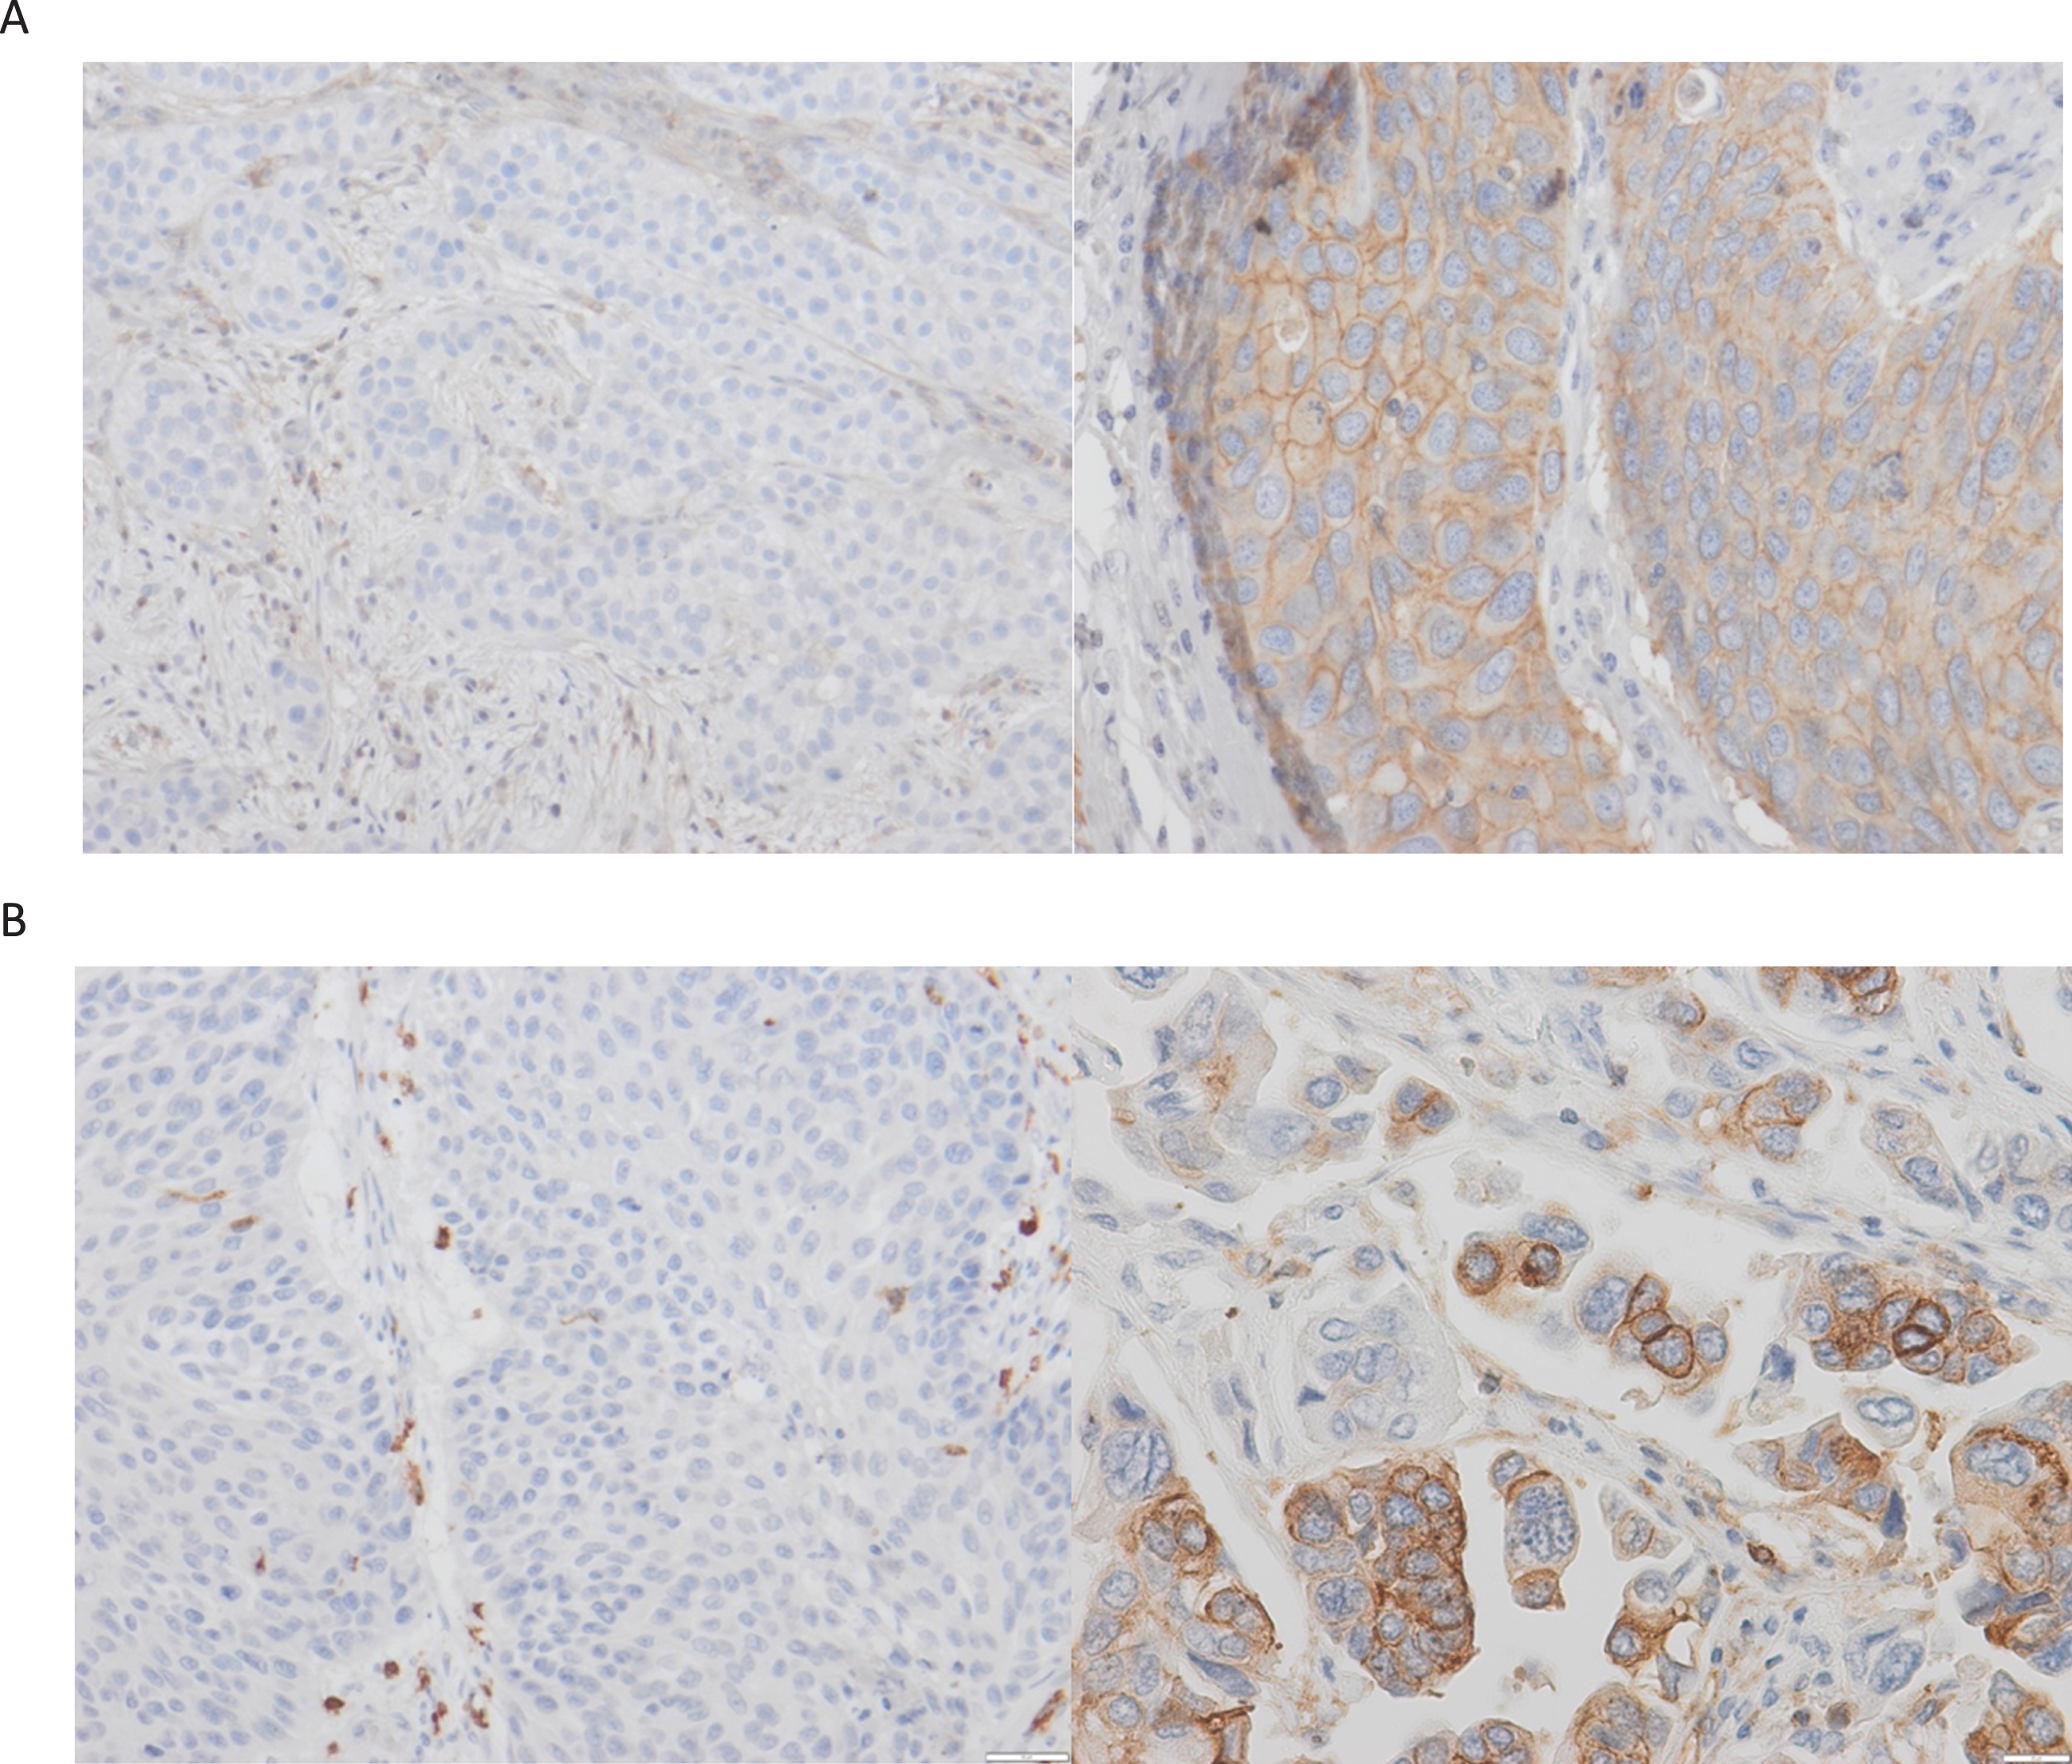 MHC immunohistochemistry.Image A: A case with complete lack of MHC I expression (left) and a case with >50% of MHC I-positive tumor cells (right). Image B: Same for MHC-II expression (400x magnification in positive cases to show membranous expression.